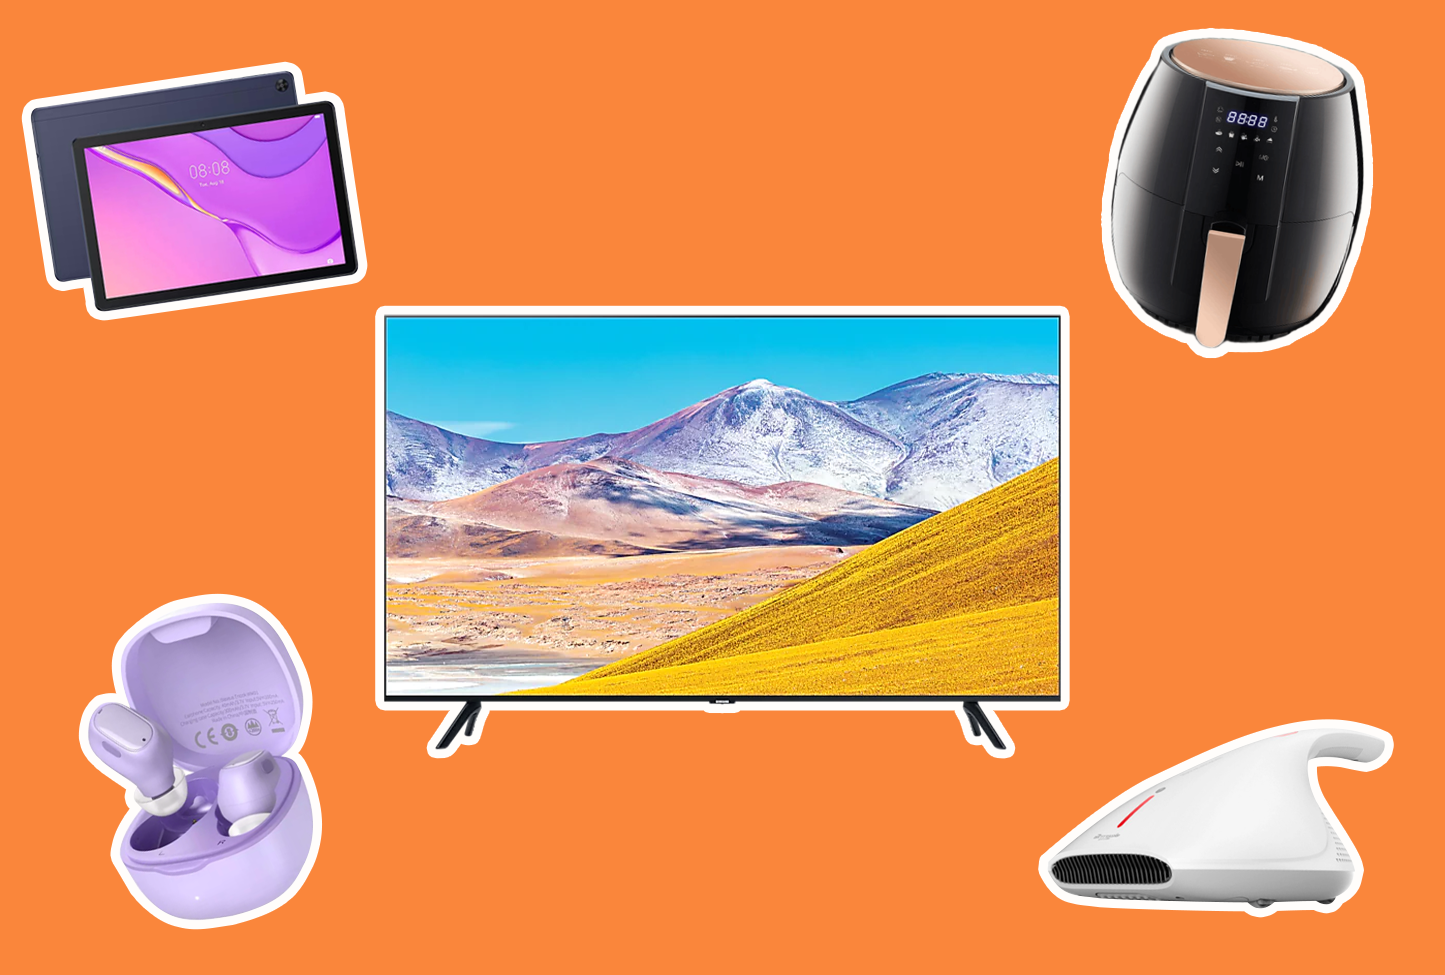 Whether it’s for practical or for leisure, these gadgets and appliances will make your home EXTRA every day! Add to cart now to SAVE UP TO 70% OFF on 